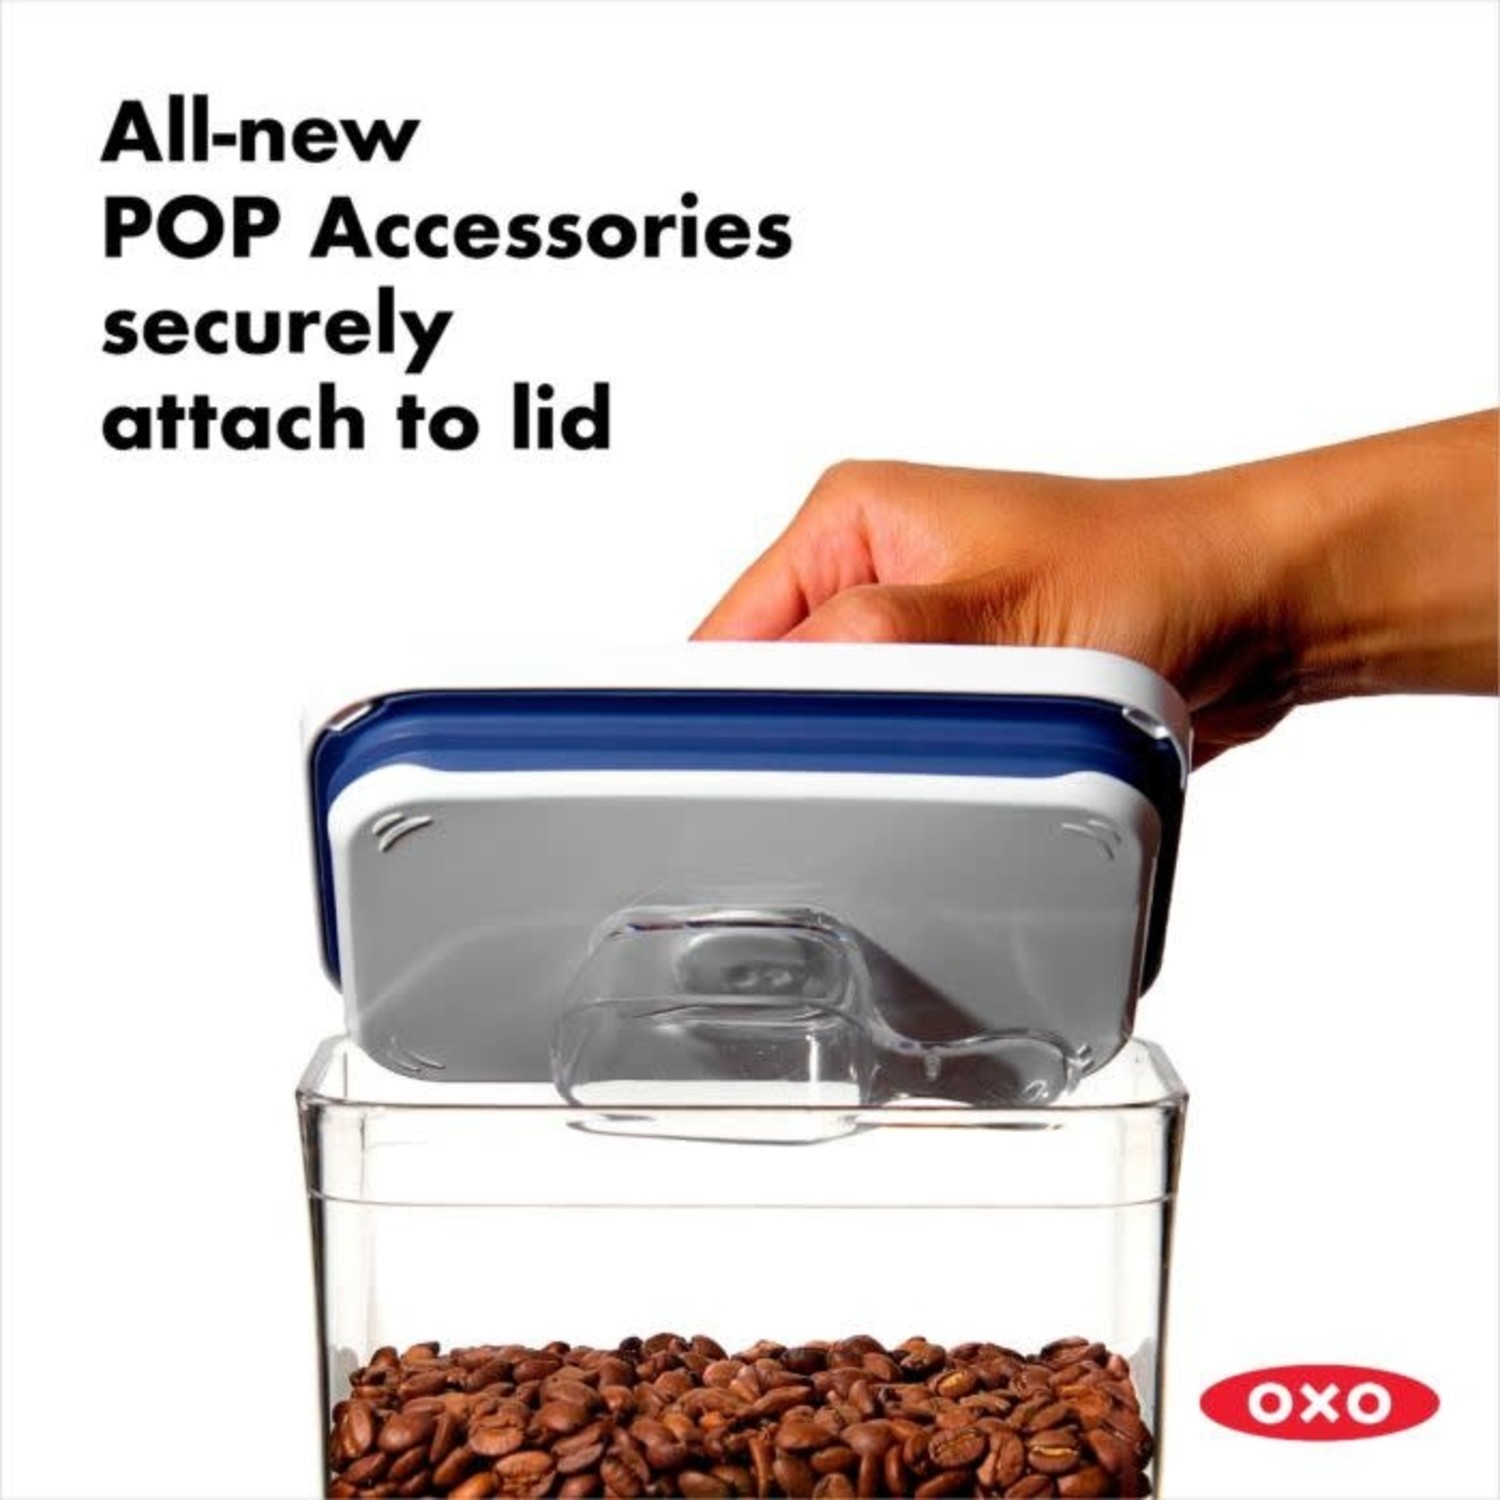 OXO Pop 4.2 liter Storage Container - Whisk